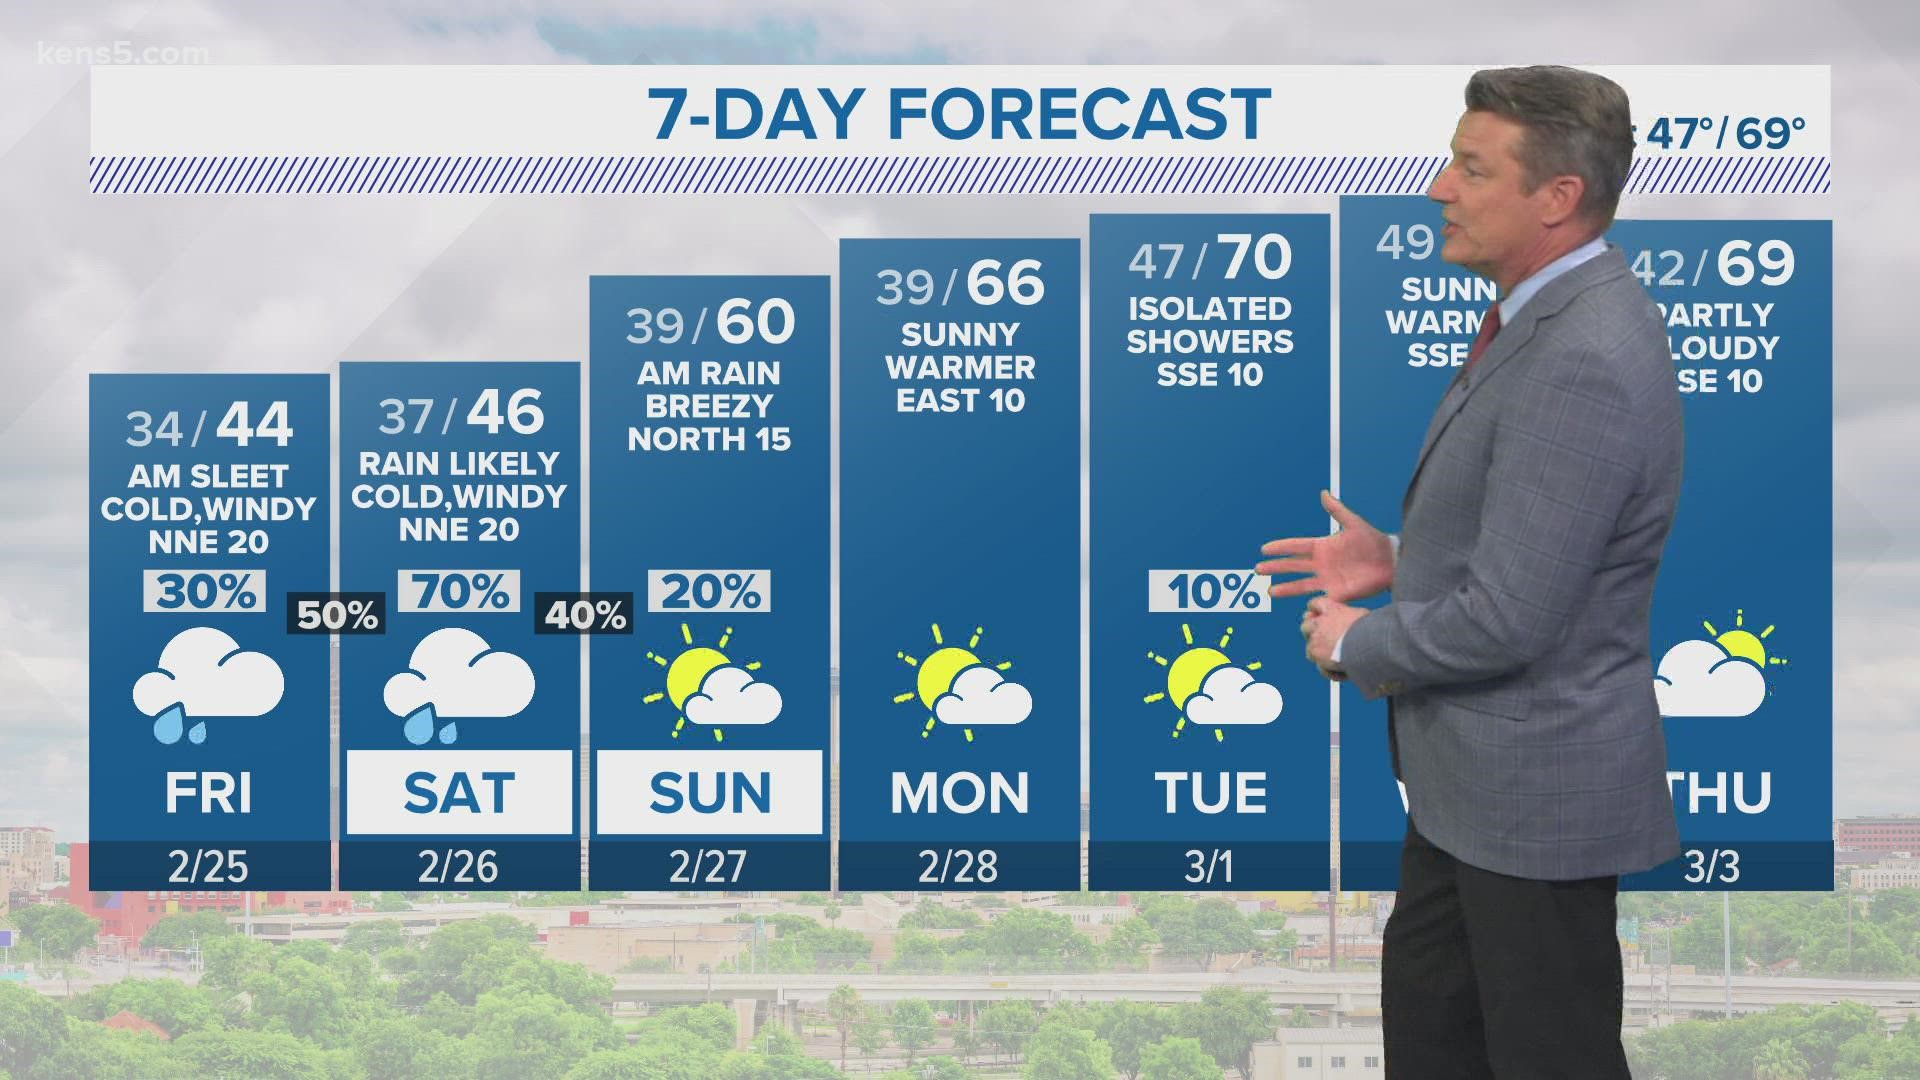 San Antonio's best chance at showers will be Saturday.